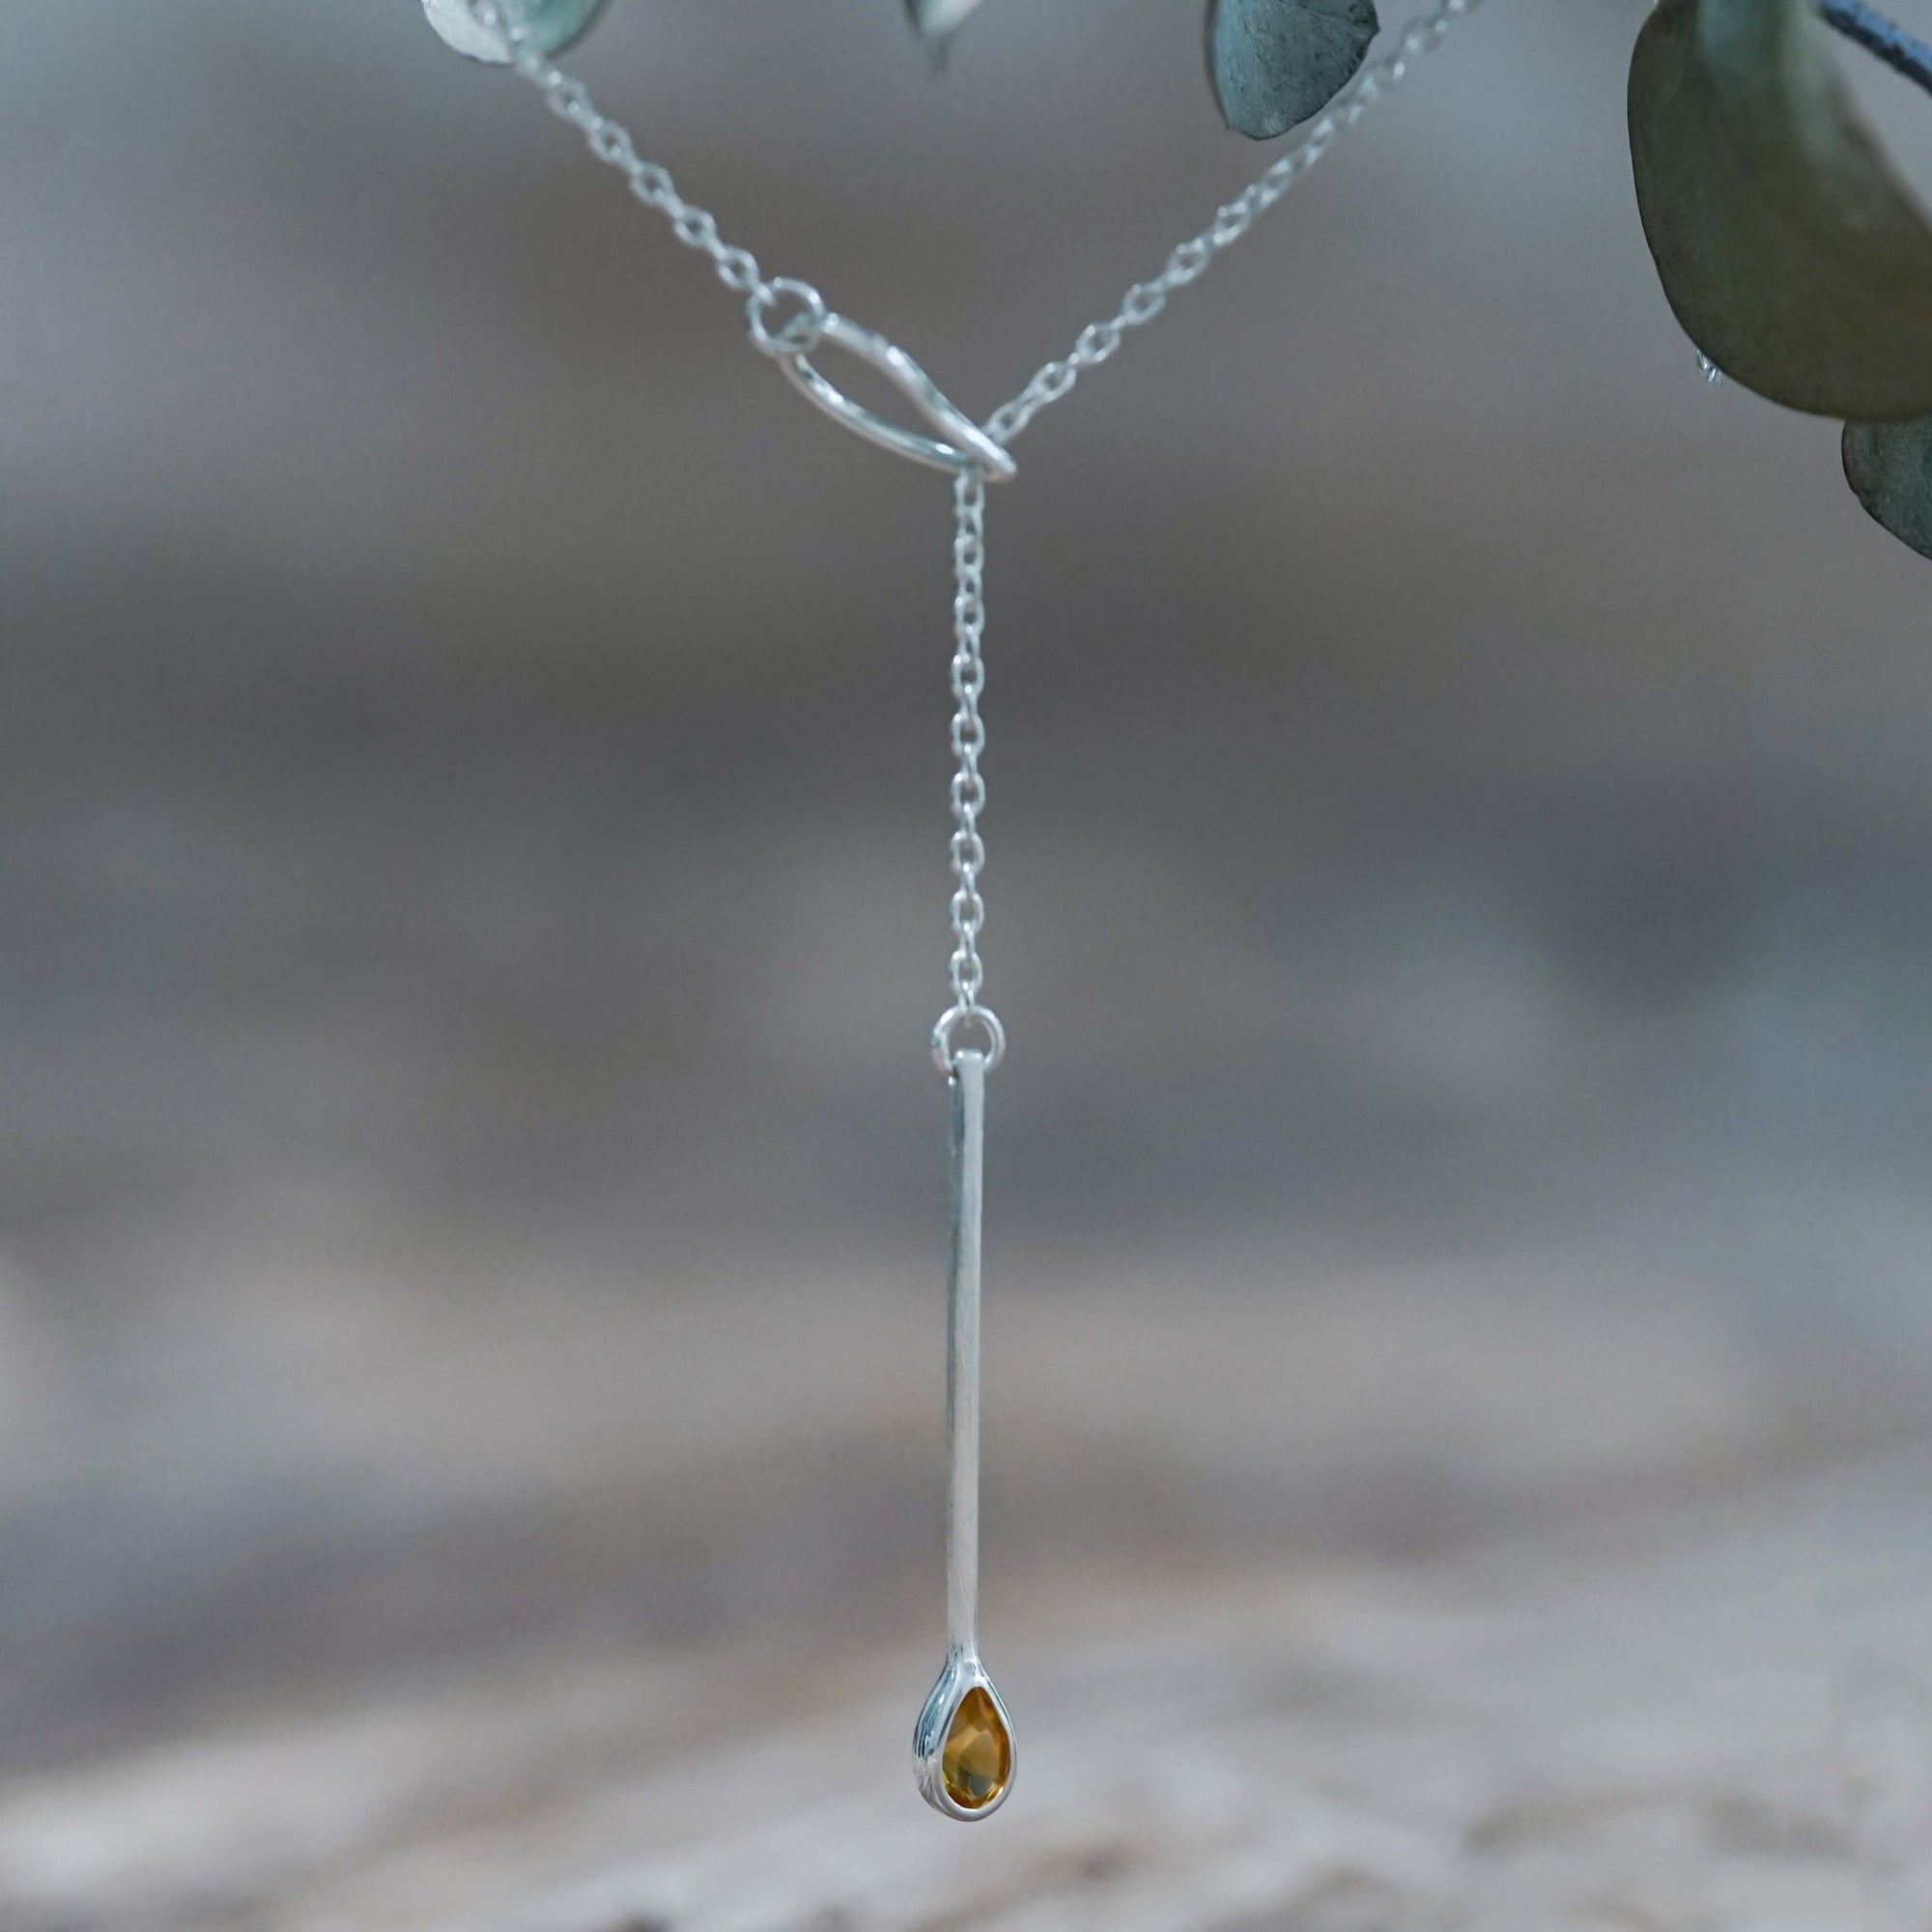 Citrine Matchstick Lariat Necklace - Gardens of the Sun | Ethical Jewelry